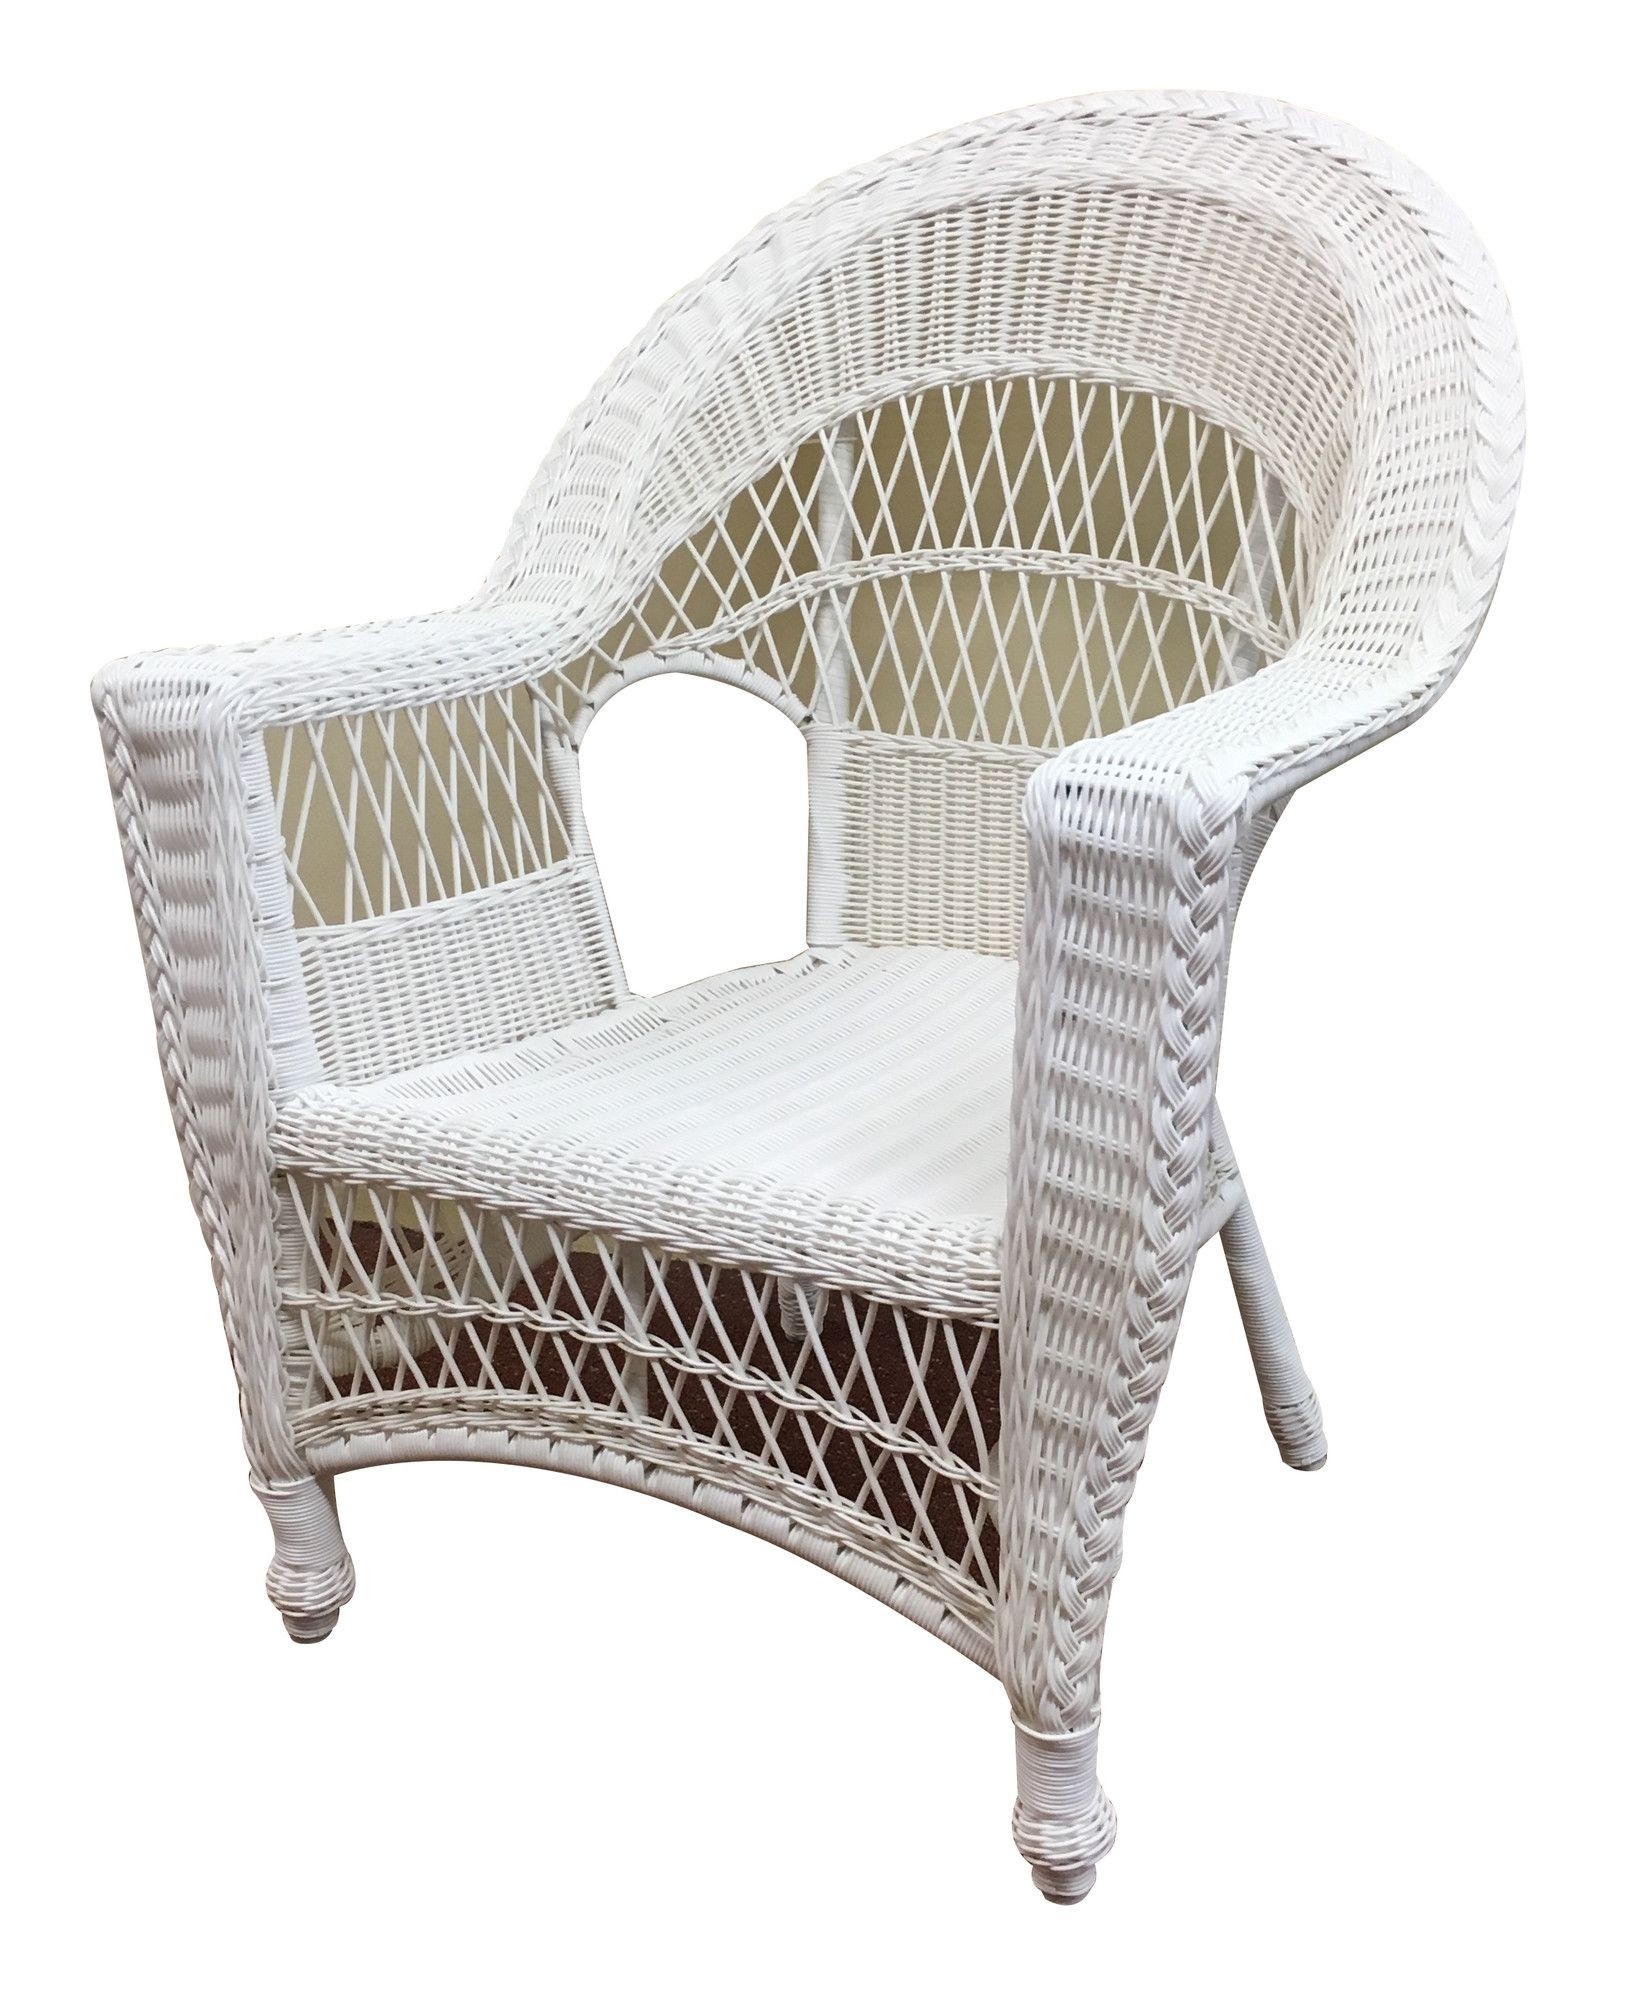 Madison arm chair outdoor wicker chairs patio dining